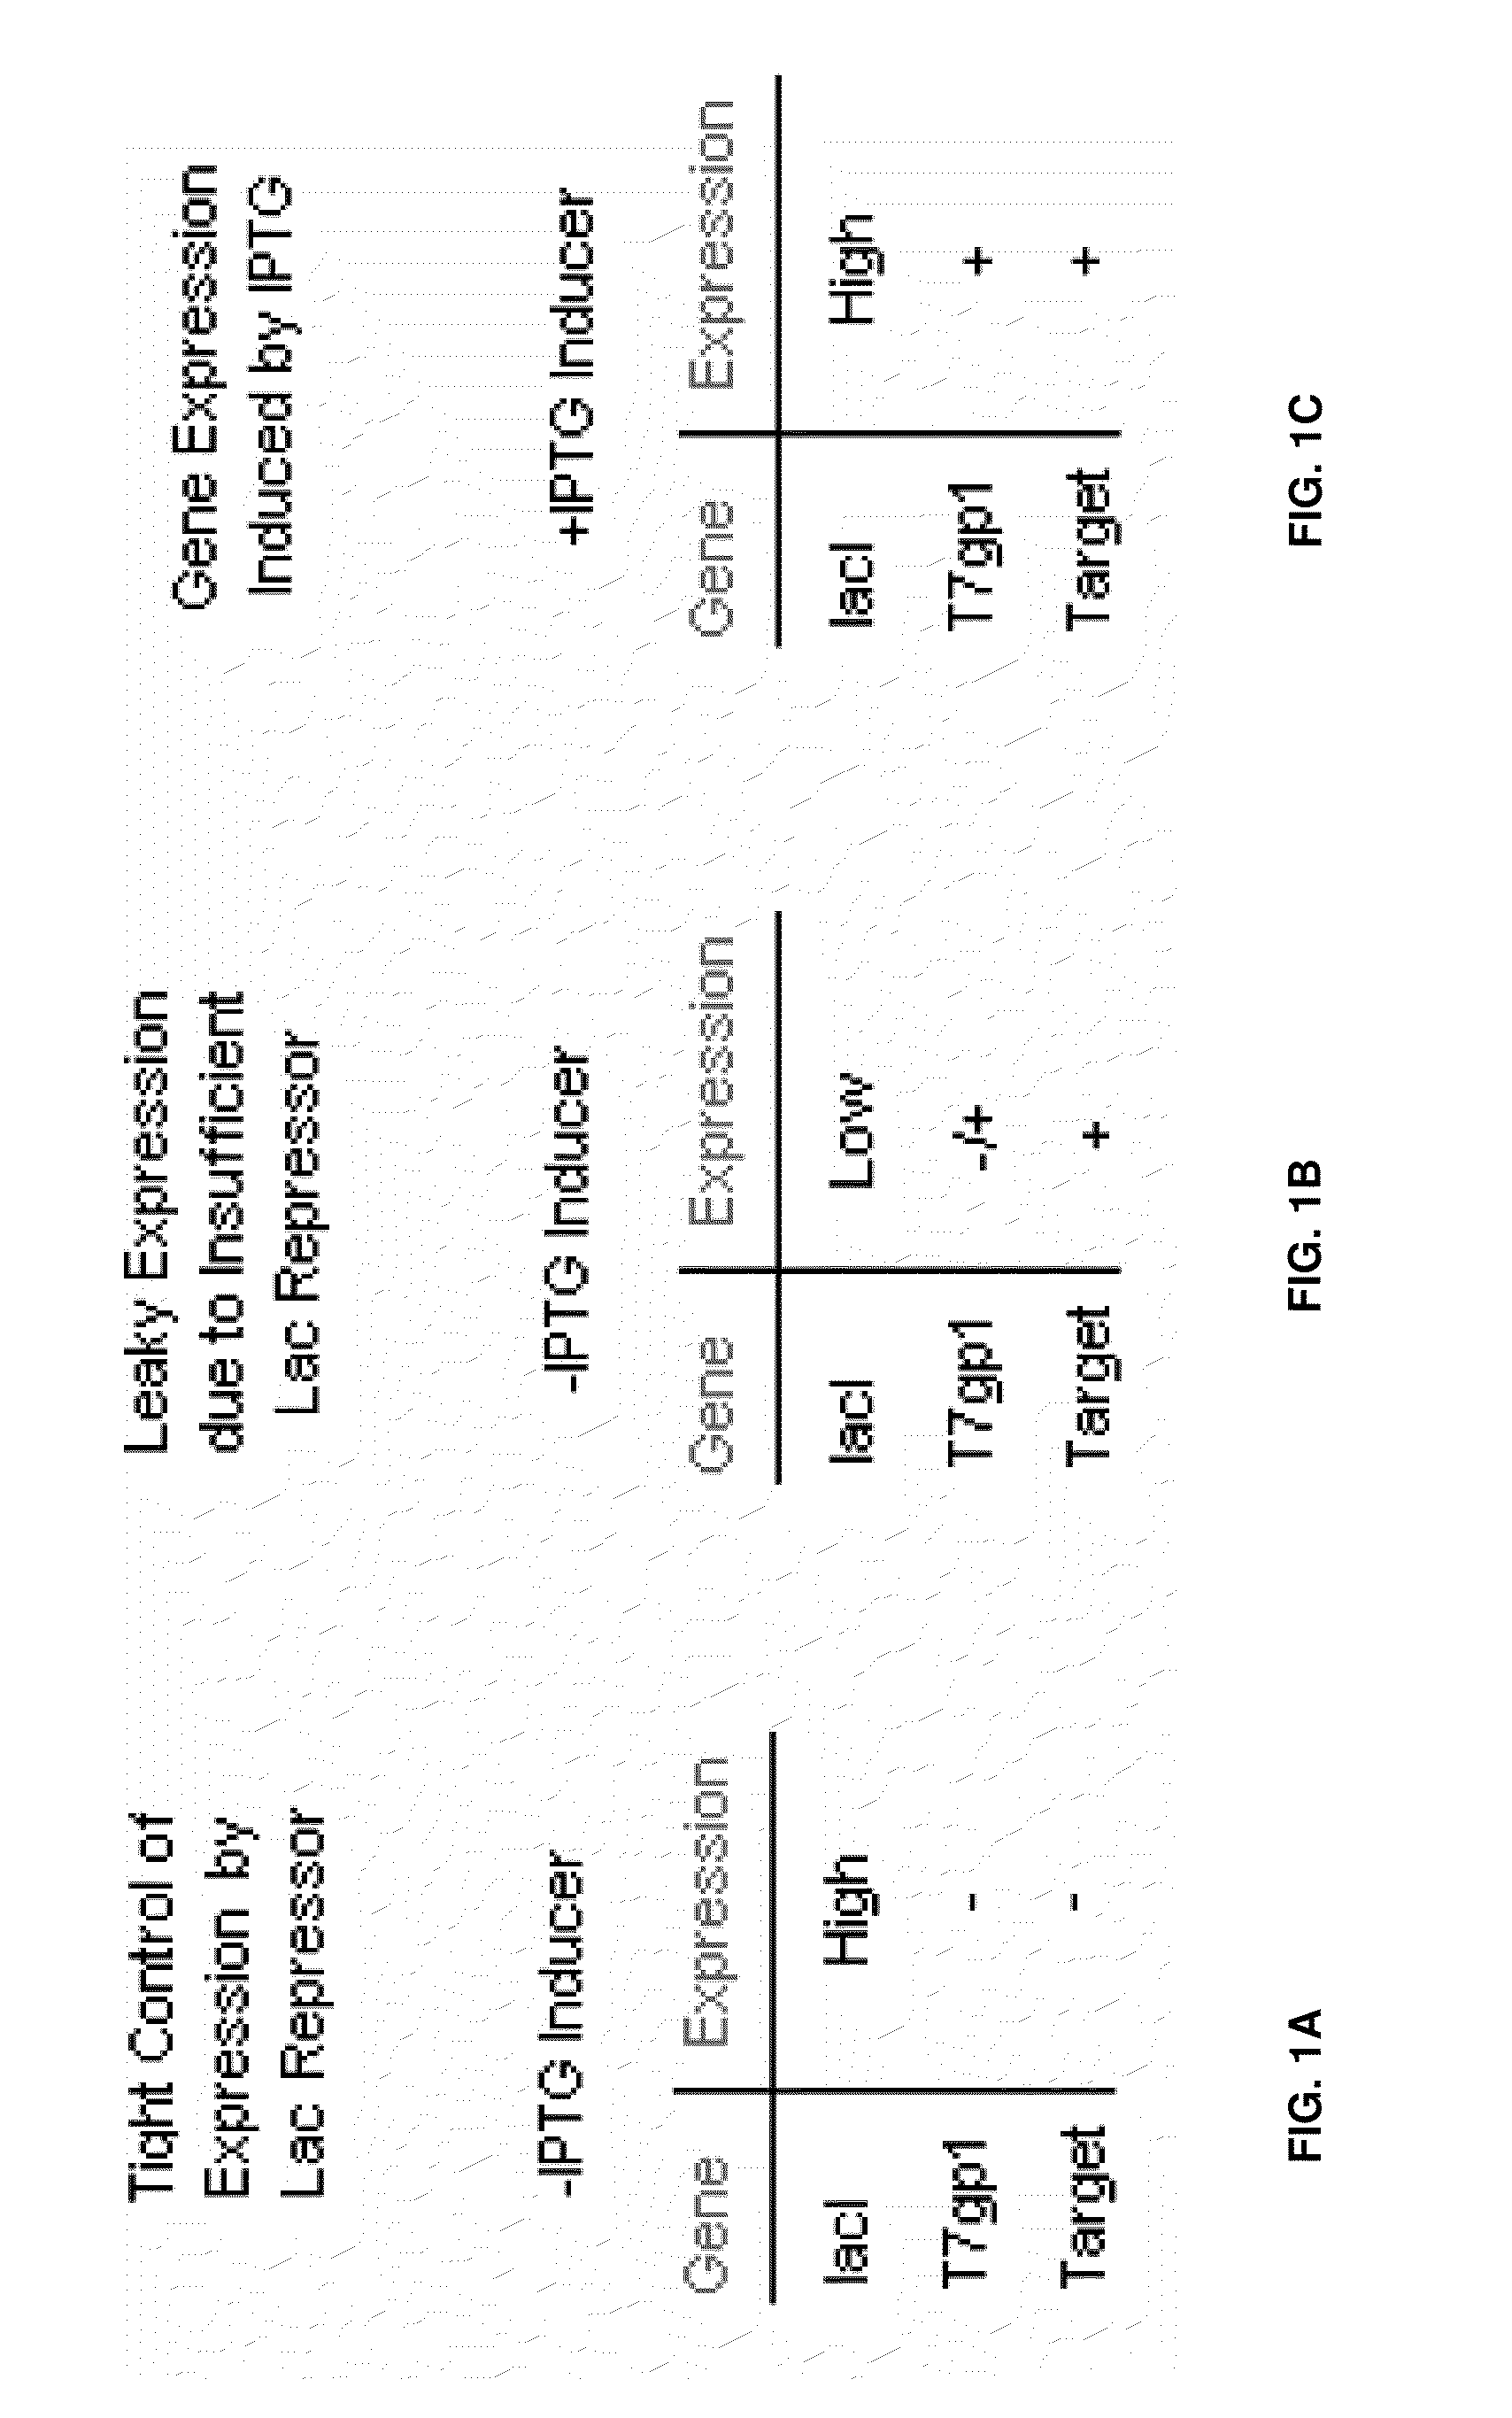 Host-vector system for cloning and expressing genes